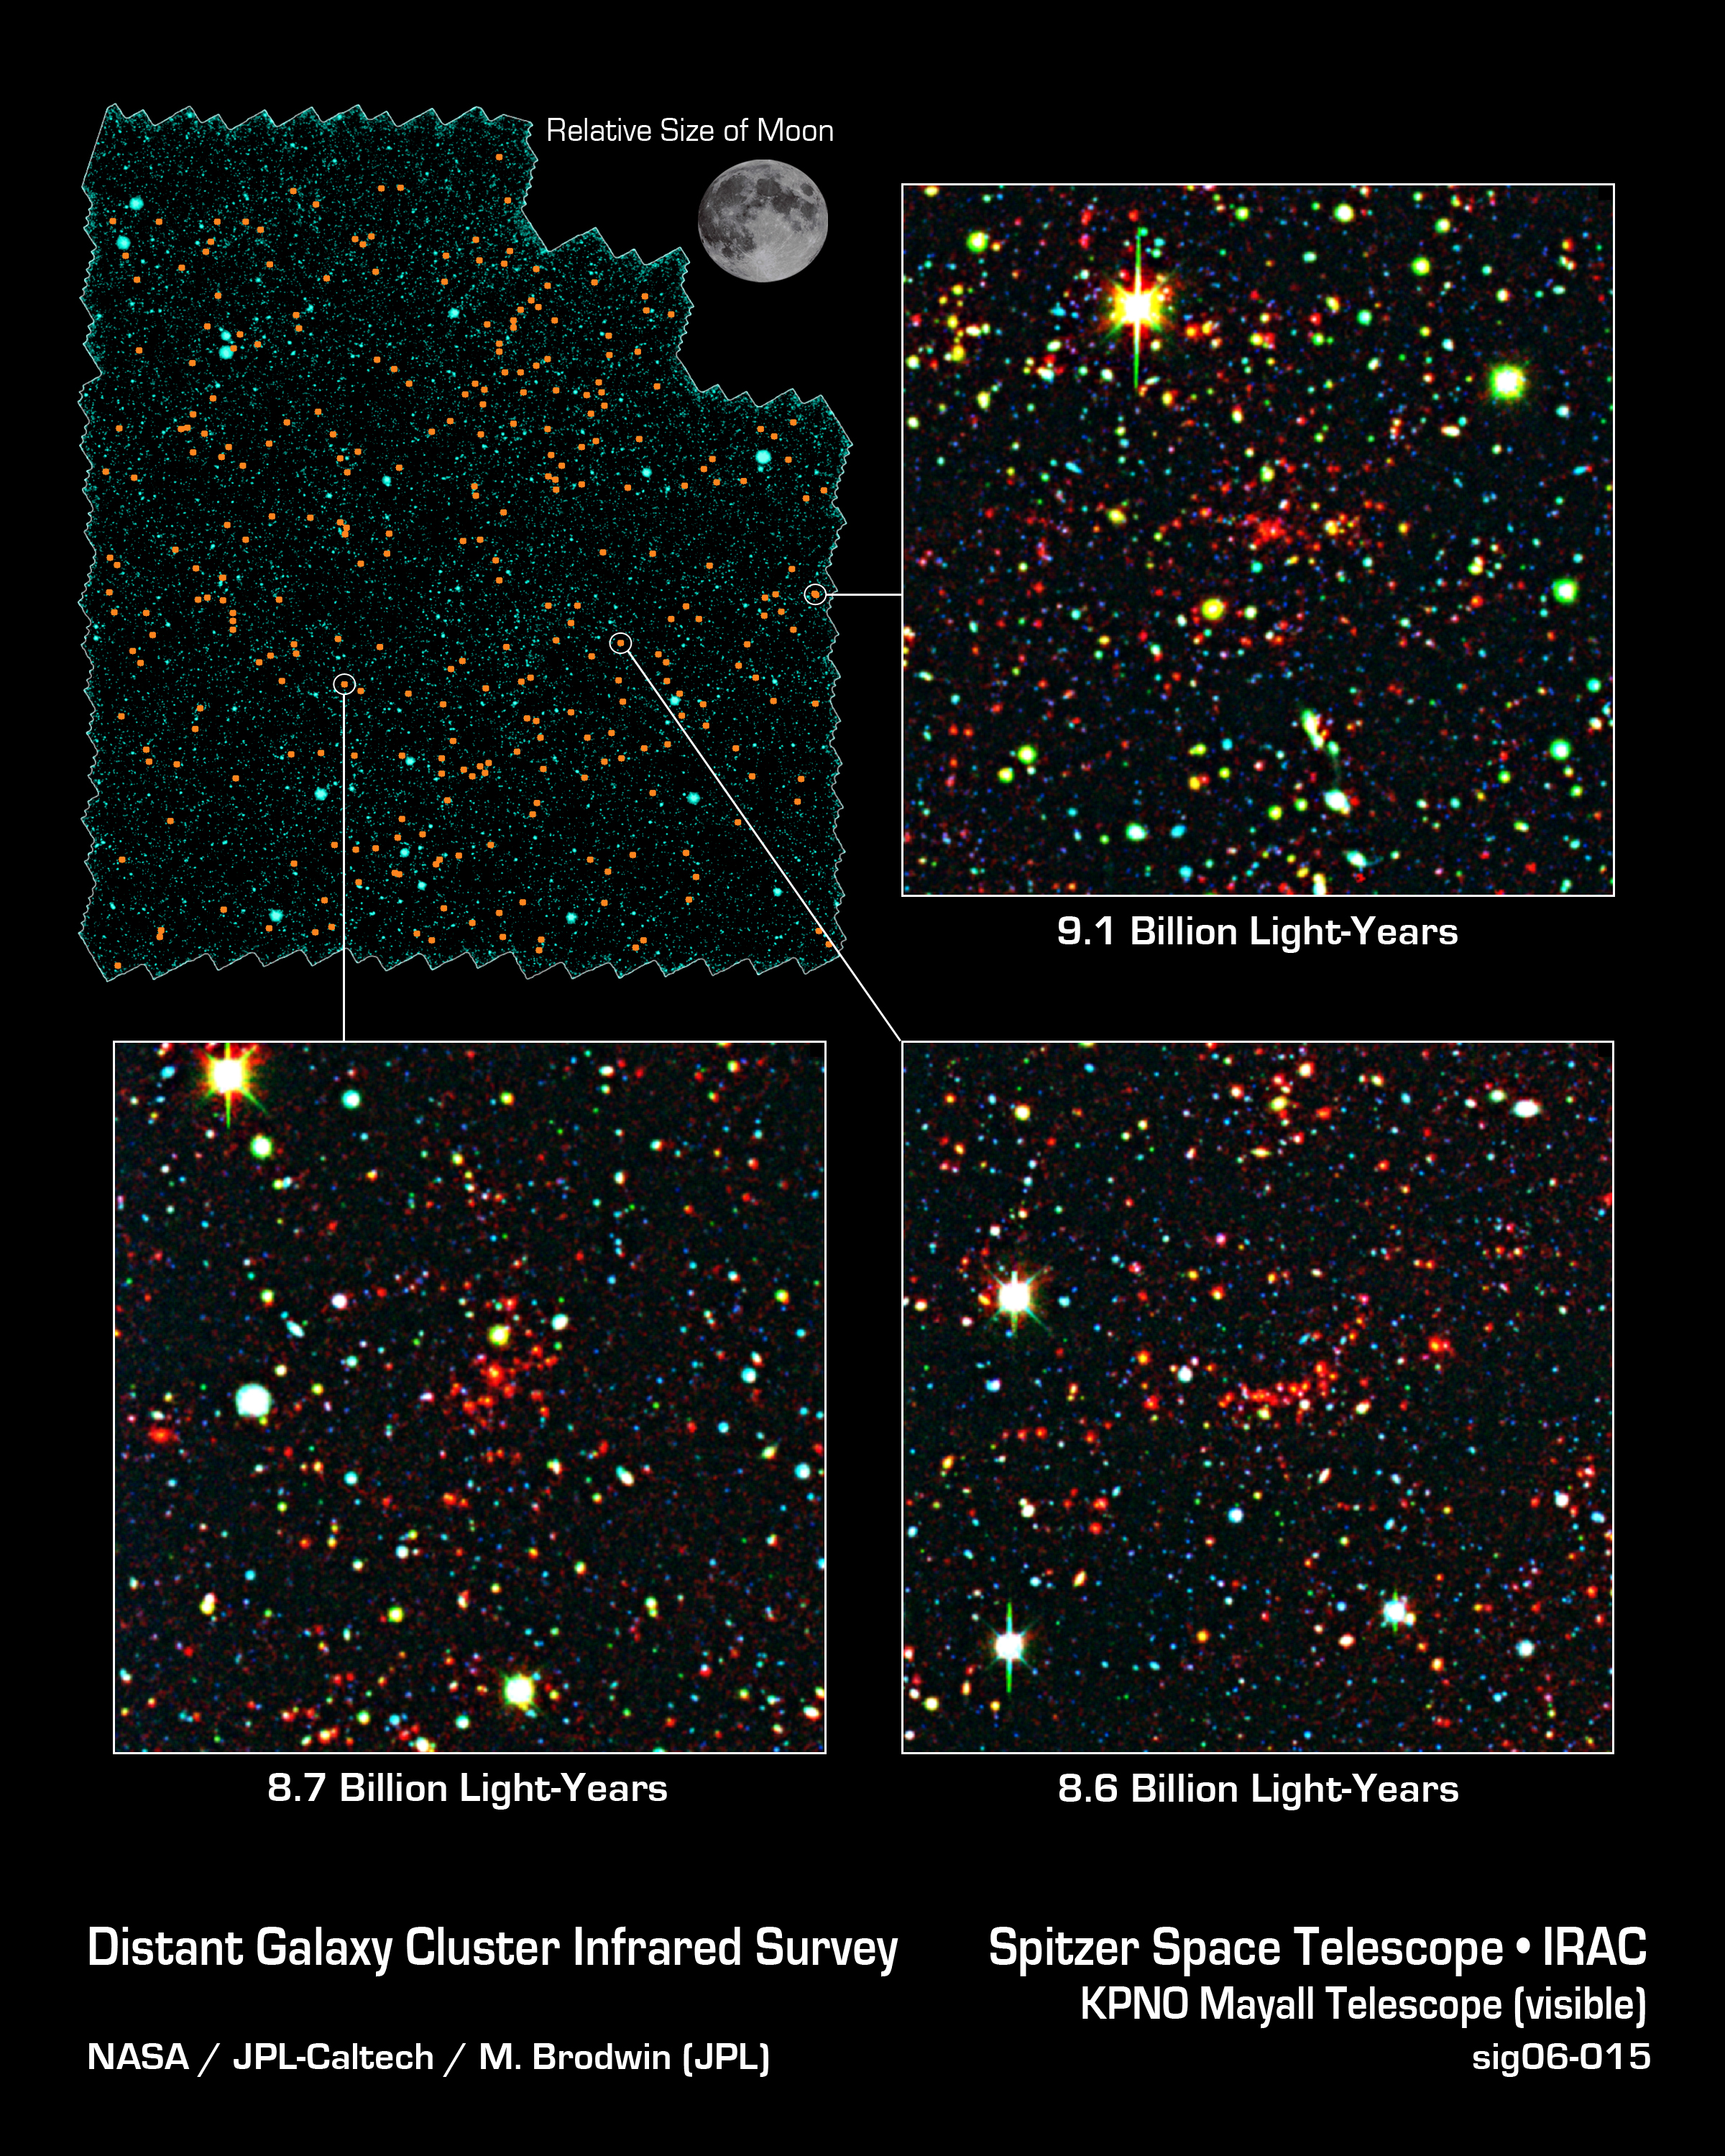 Galaxies Gather at Great Distances